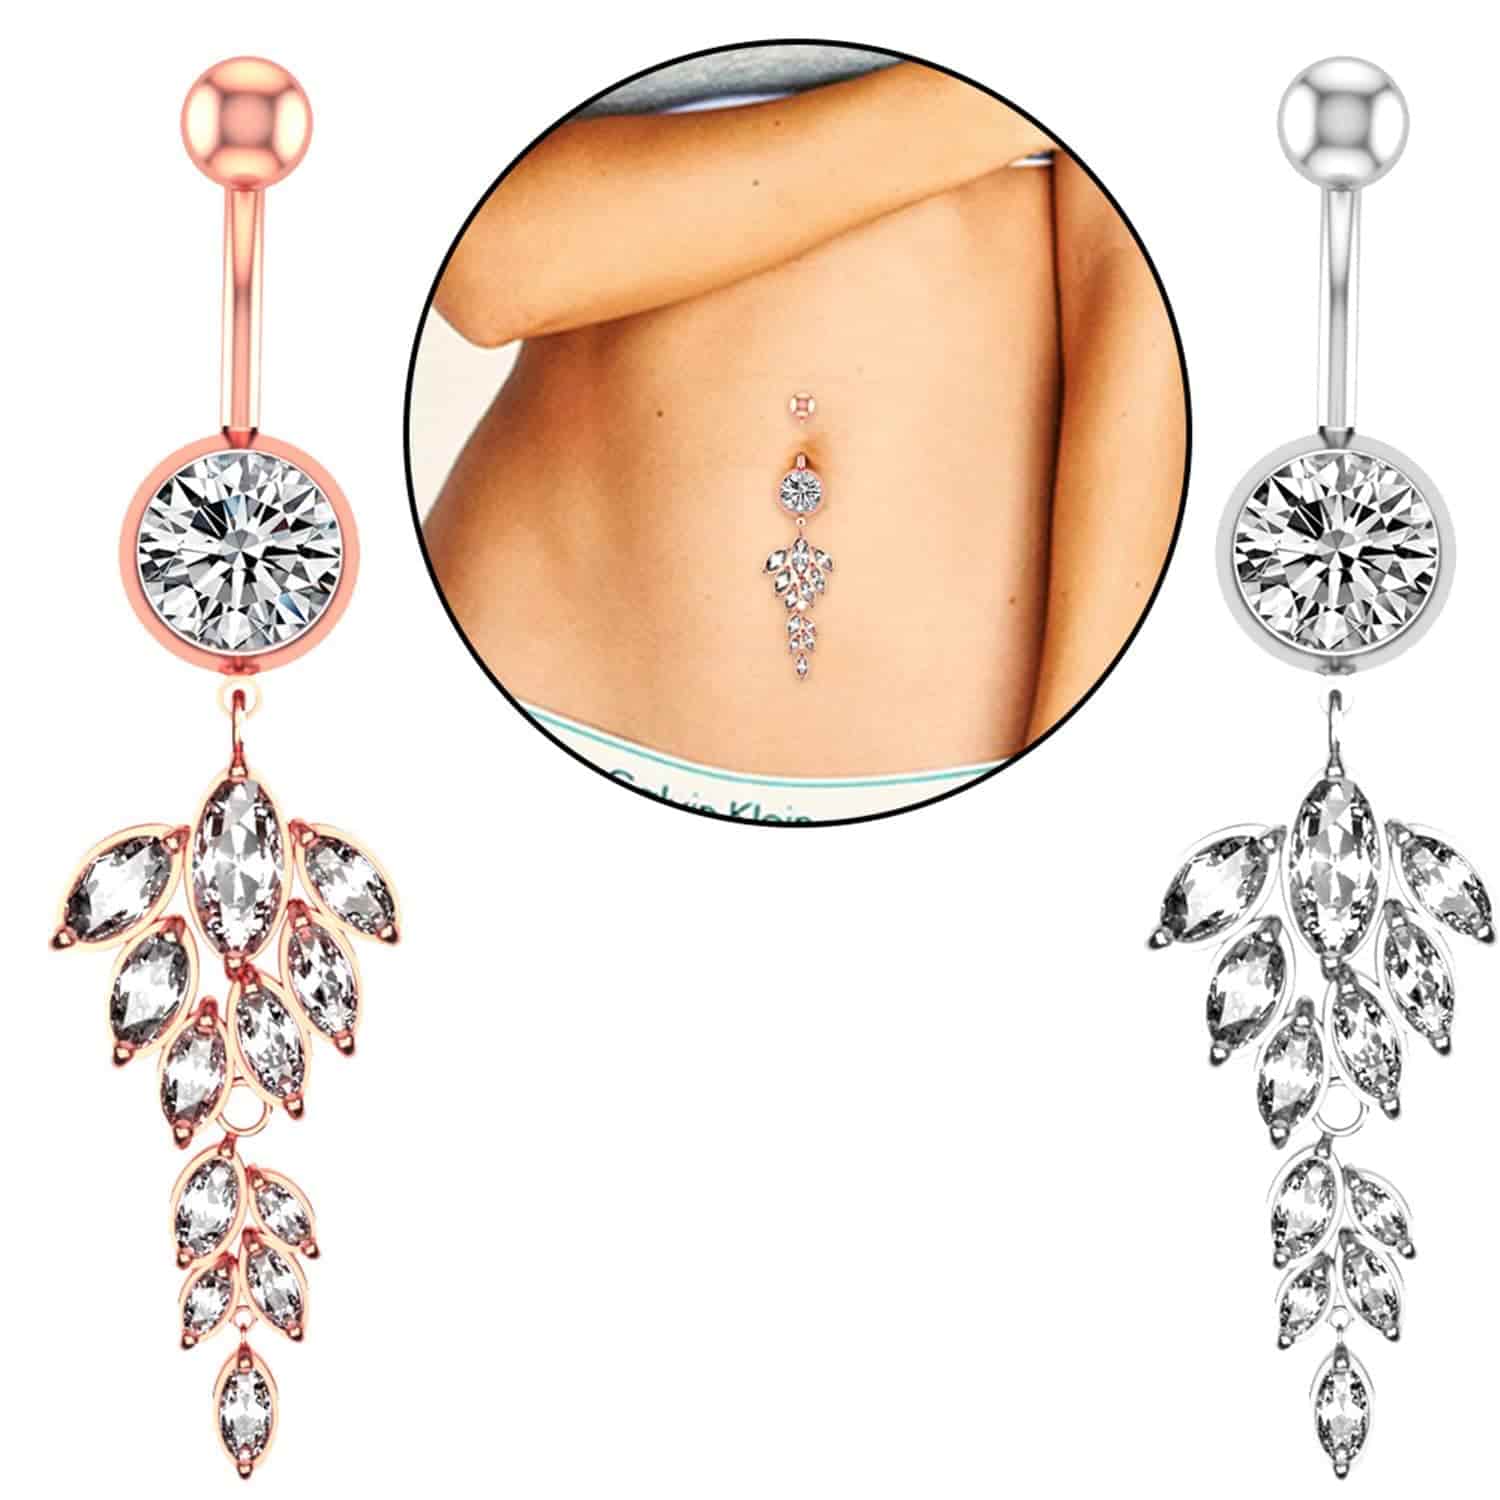 14G Sea Glass Belly Ring/Cz Button Jewelry/Belly Piercing/Belly Jewelry/Navel  Ring/Navel Piercing/Navel Jewelry/Gift For Her - Yahoo Shopping